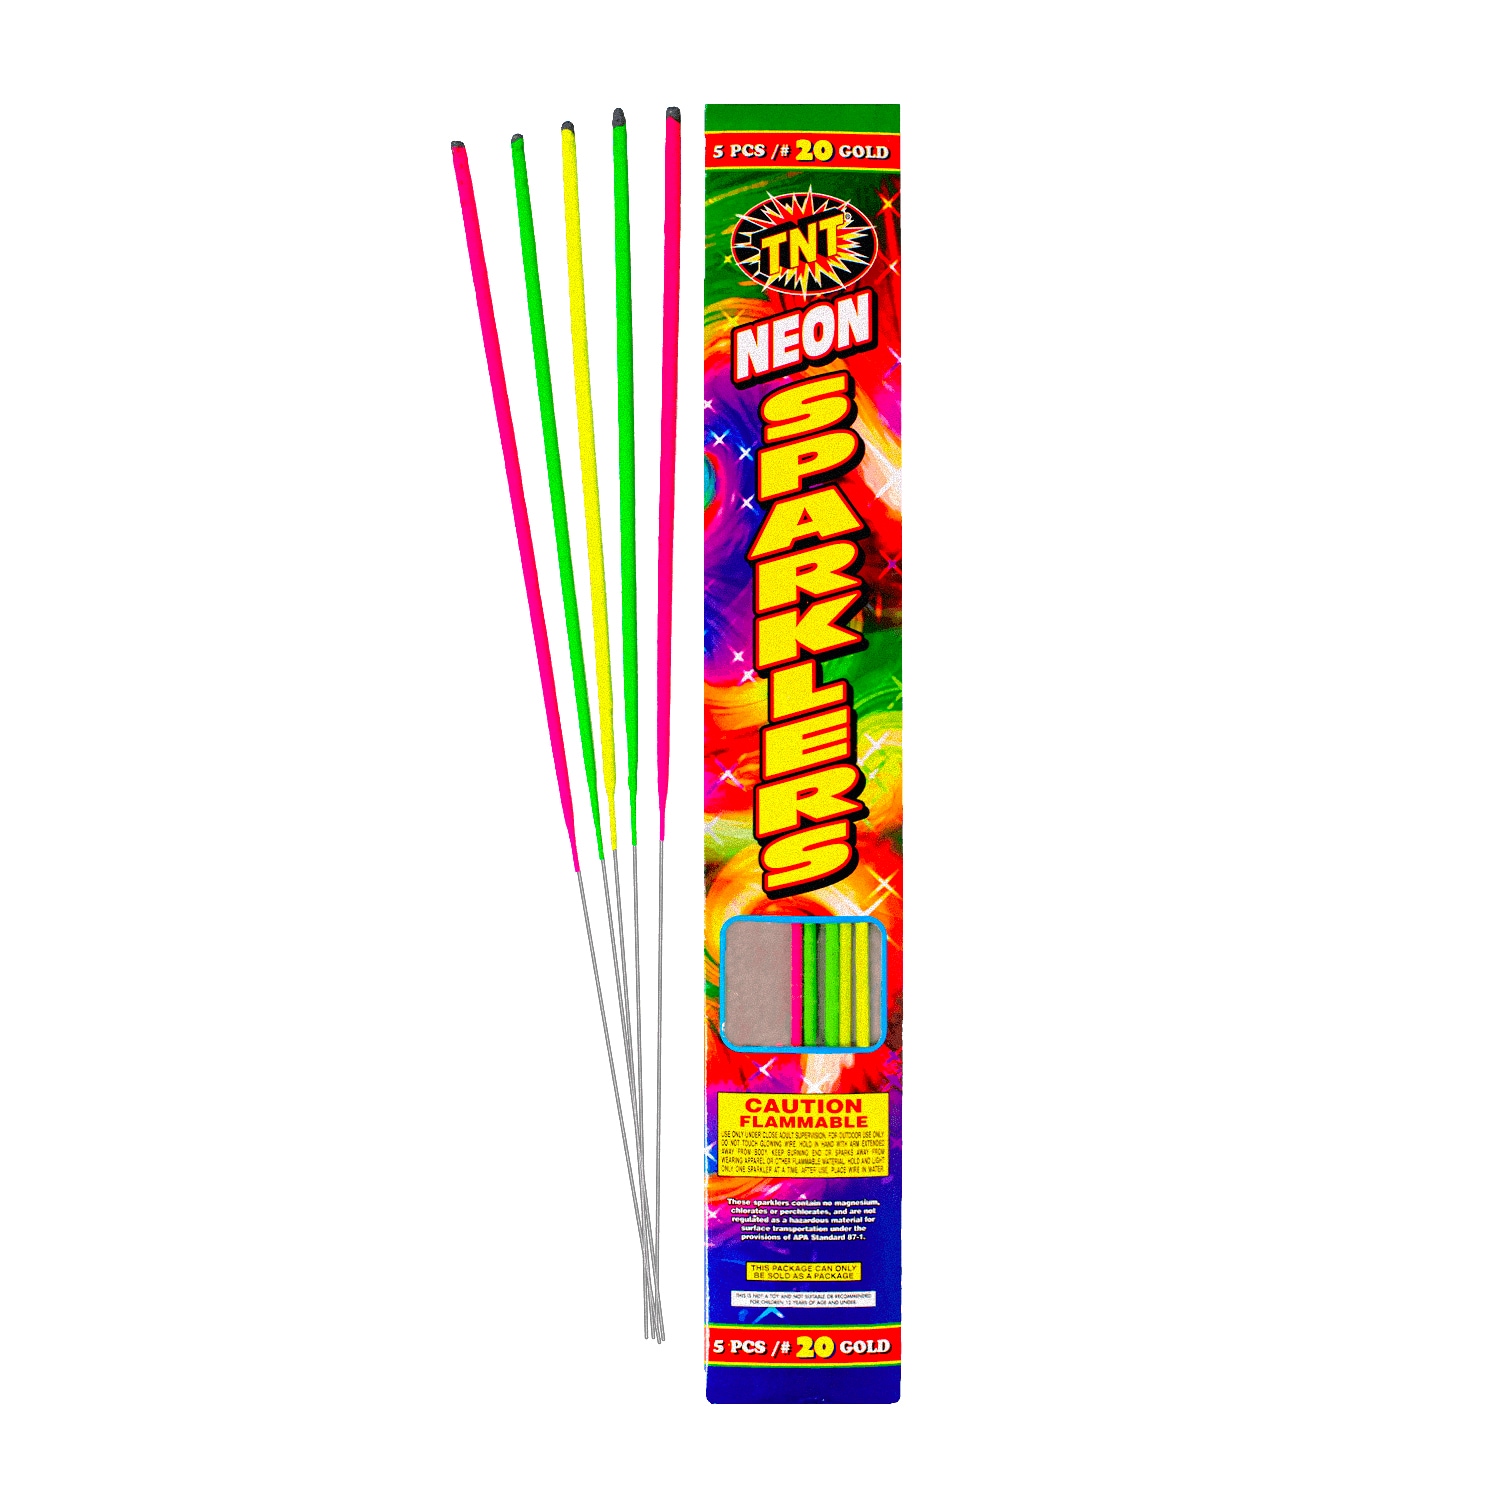 TNT Fireworks Color Blast Tray Firework - Sparkling Assortment of Colorful  Fountains - Includes 1 Fountain - Create Dazzling Firework Effects in the  Fireworks department at